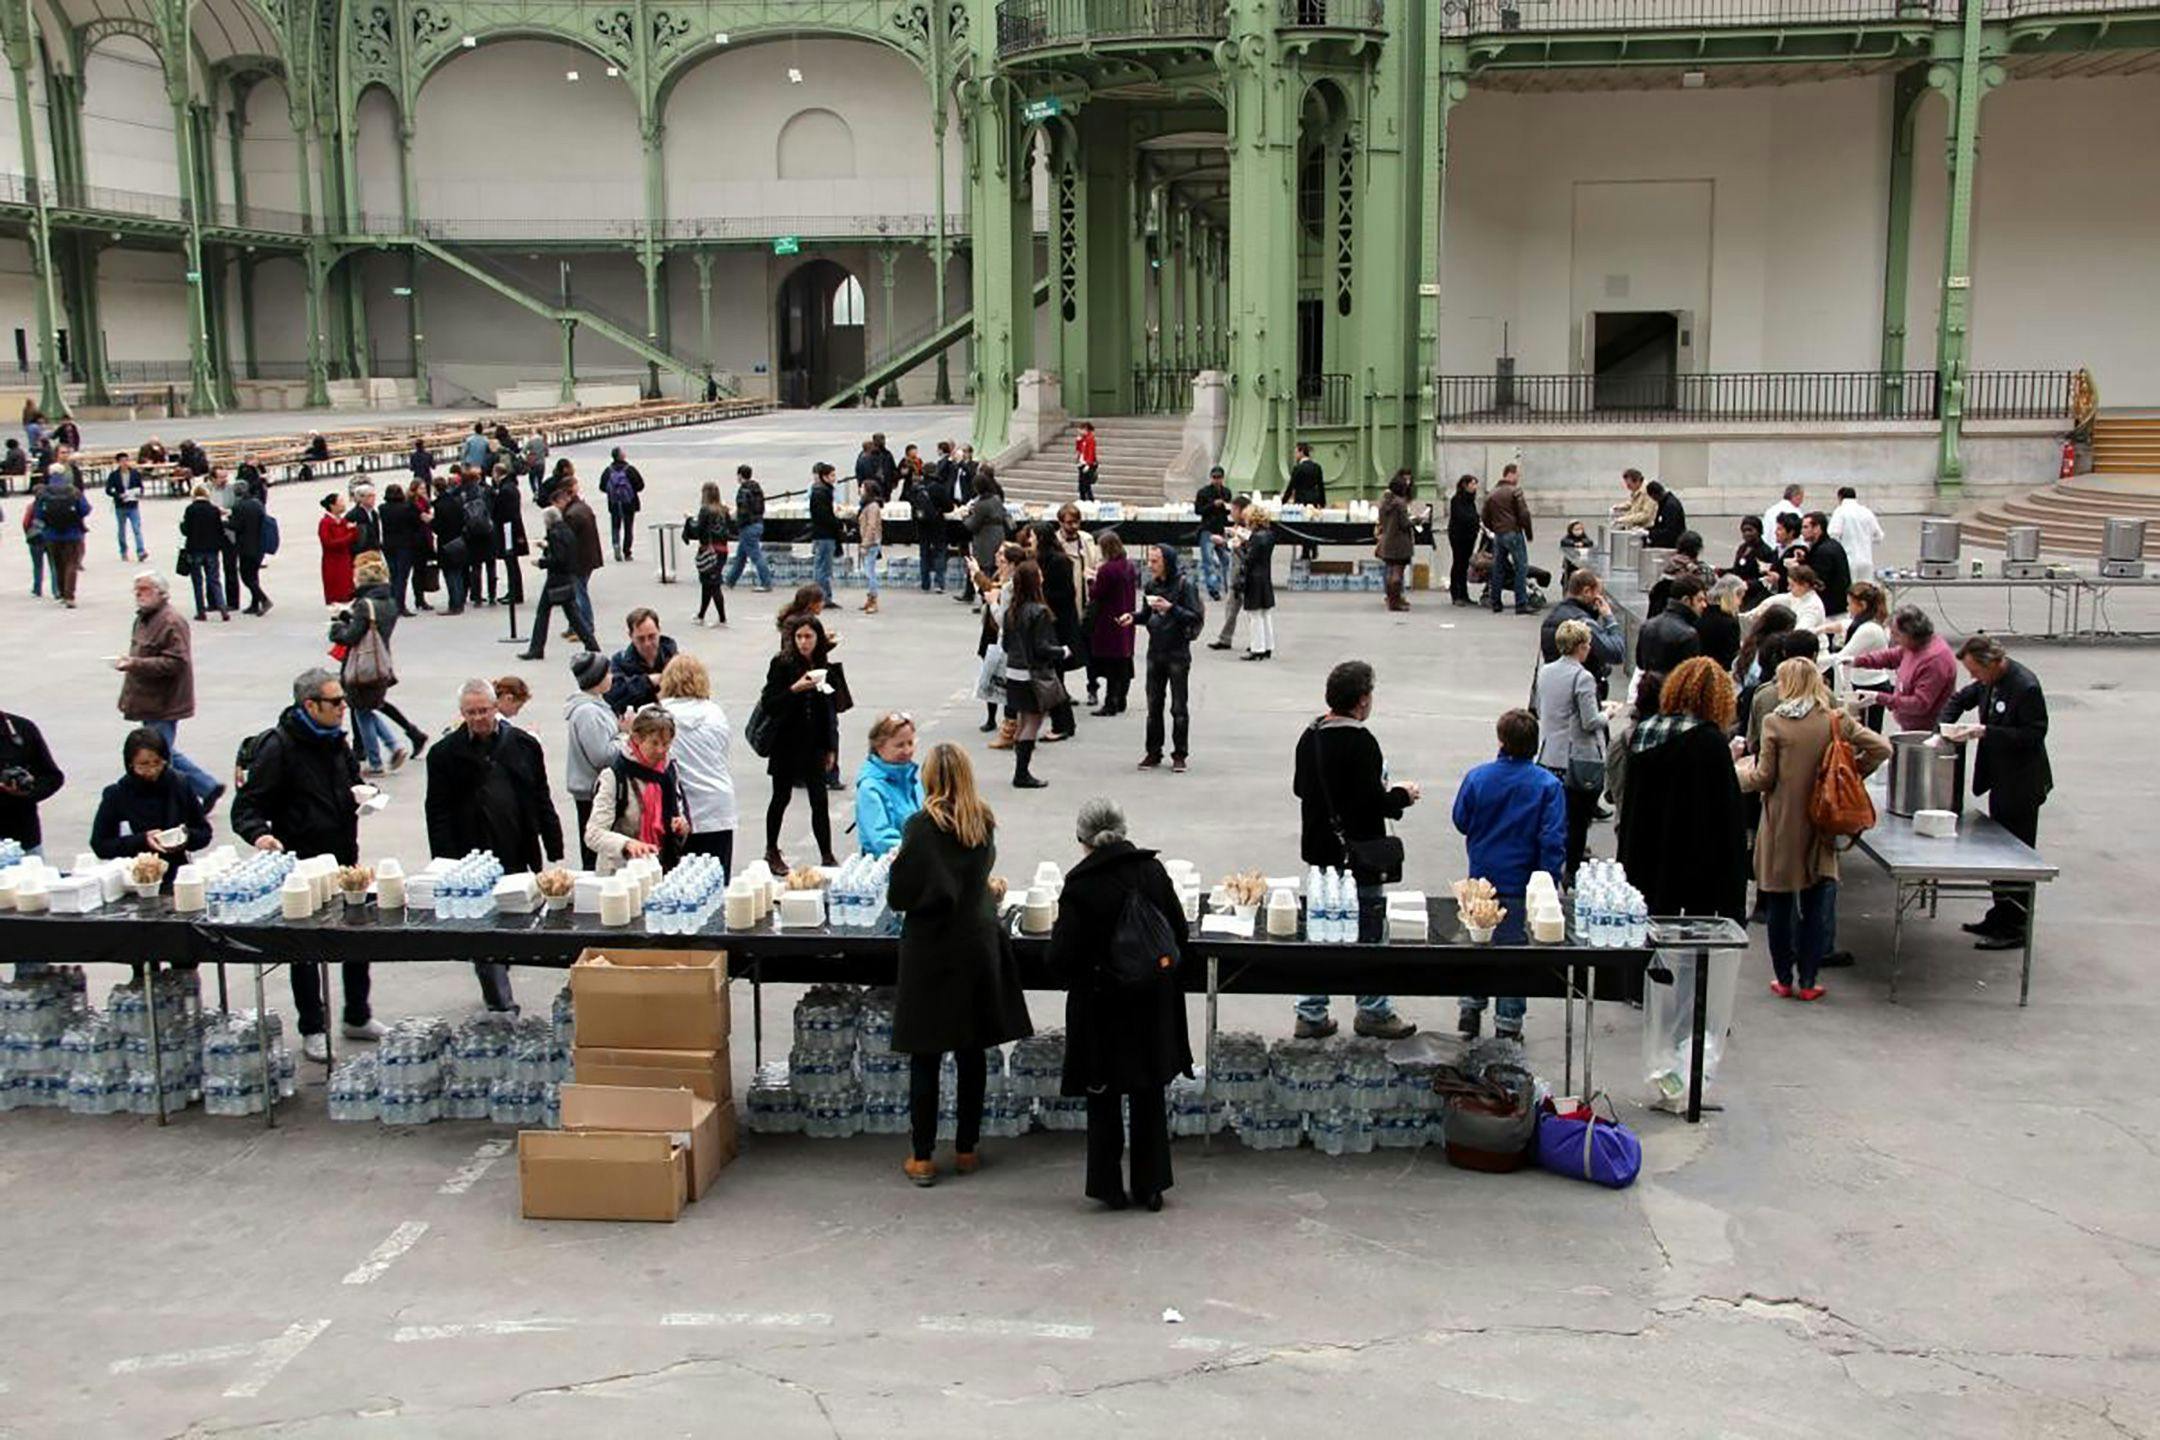 Installation view of viewers interacting within the exhibition Soup/No Soup, at the Grand Palais as part of the Paris Triennial, dated 2012.